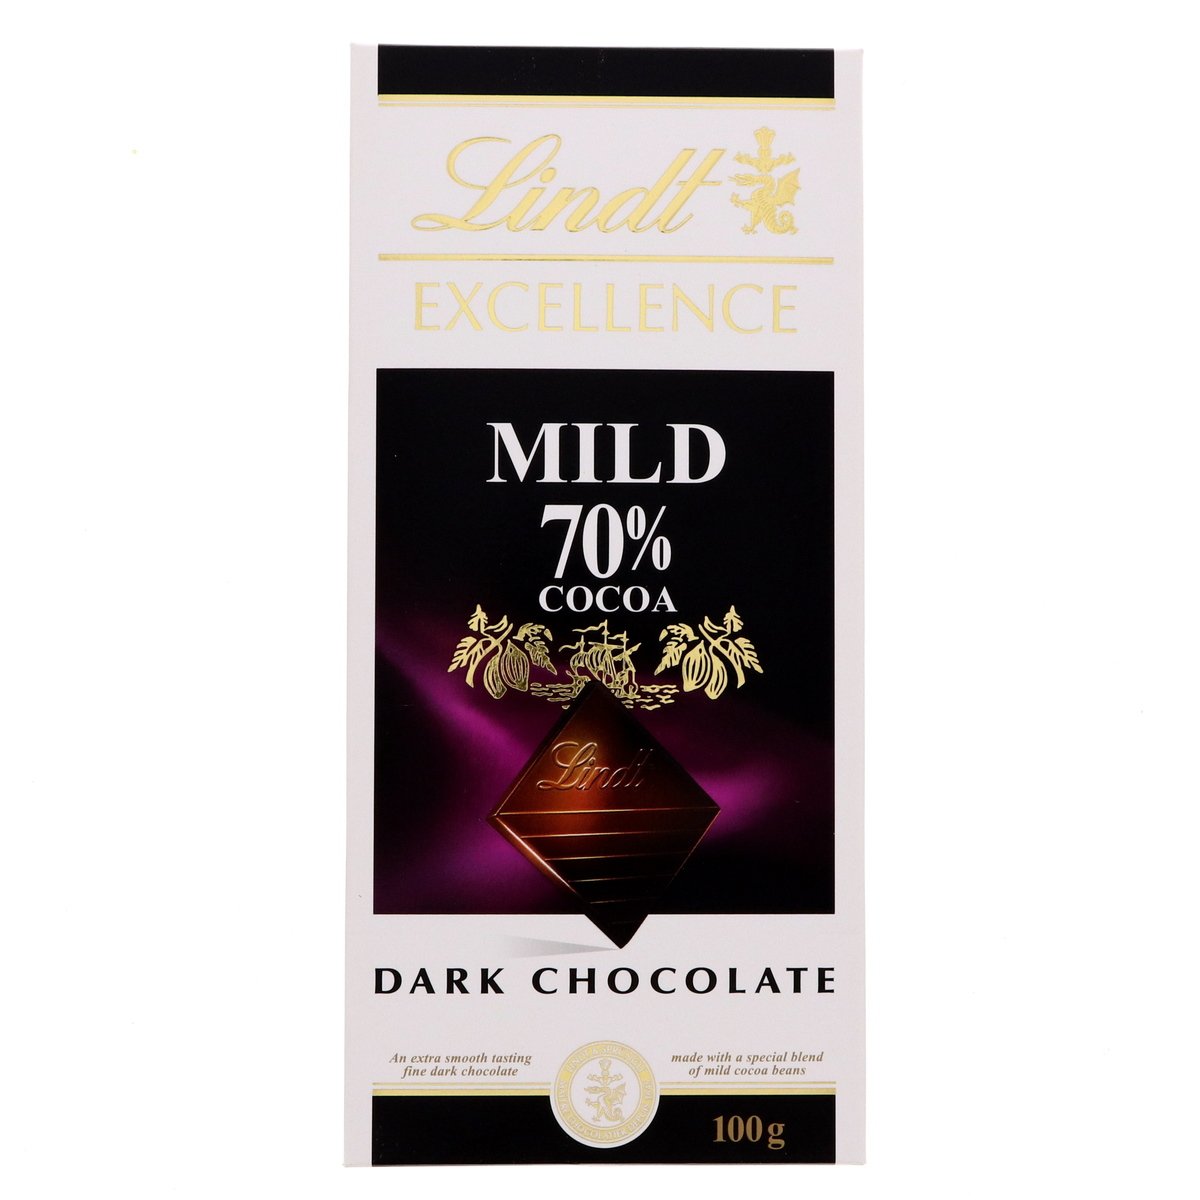 Lindt Excellence Mild 70% Cocoa Dark Chocolate 100 g